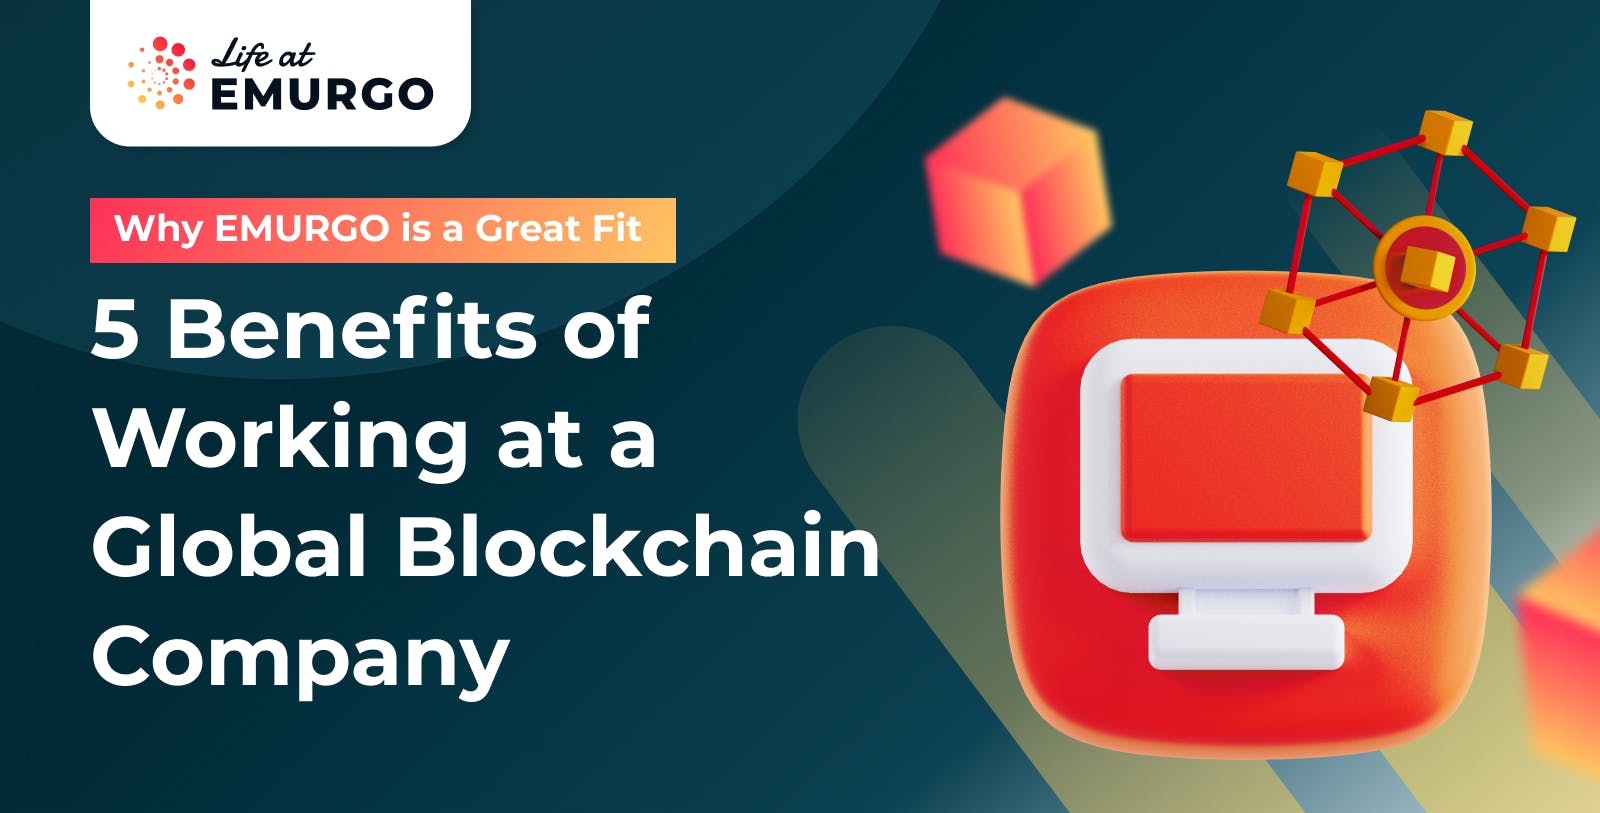 Blog-Series-Why-EMURGO-is-a-Great-Fit-5-Benefits-of-Working-at-a-Global-Blockchain-Company-blog.jpg